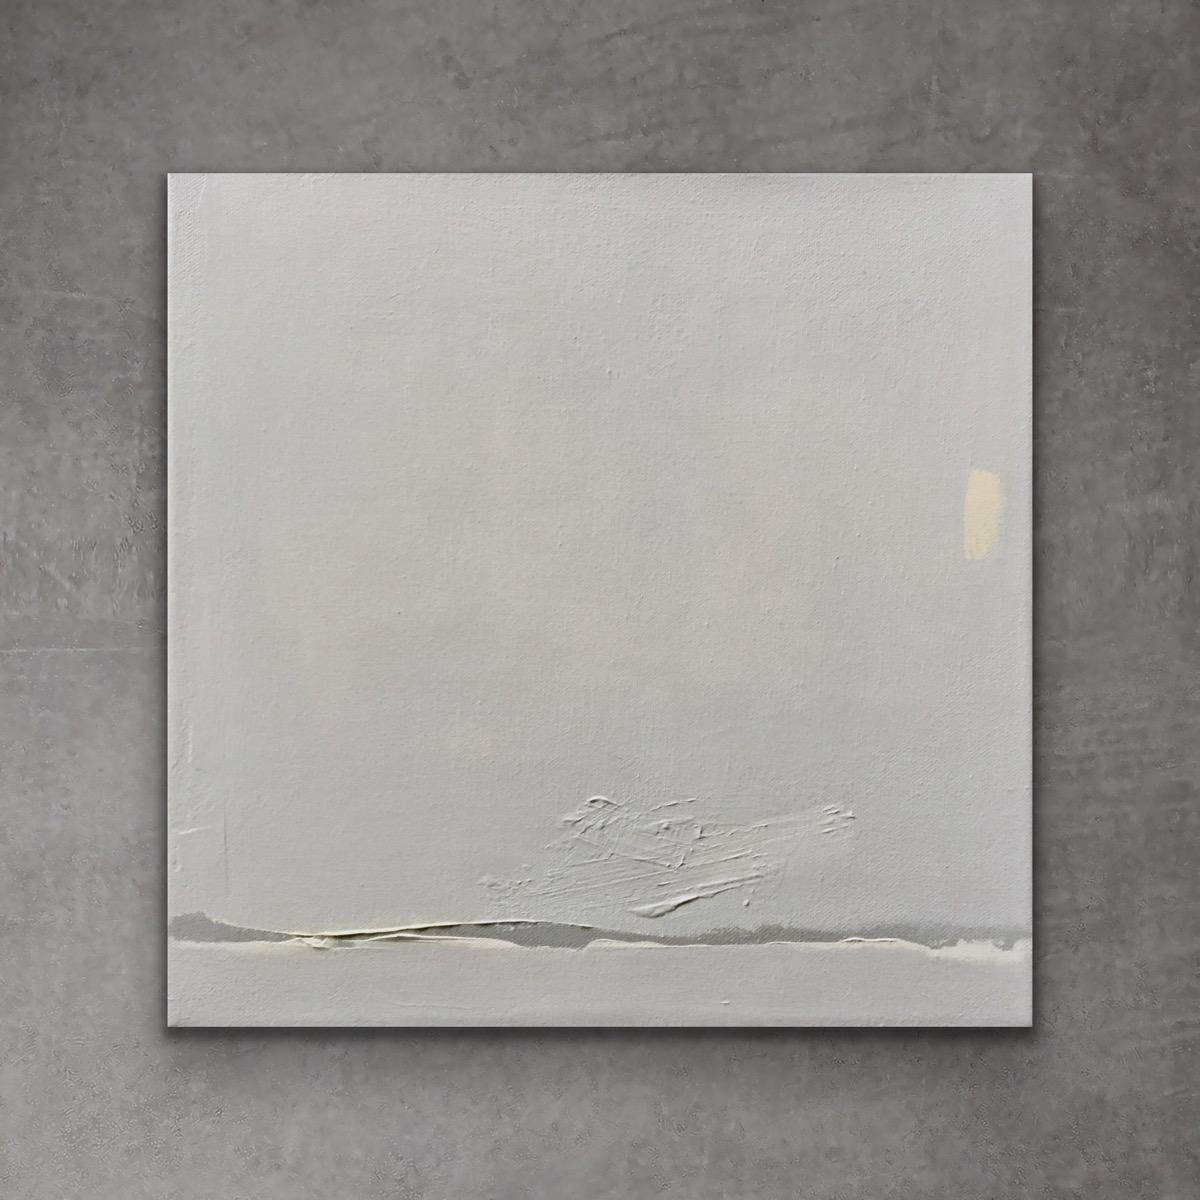 Andrea Stajan-Ferkul Abstract Painting - Peace And Quiet - (12”x12”, Grey, Beige, Minimal Abstract Landscape Painting)